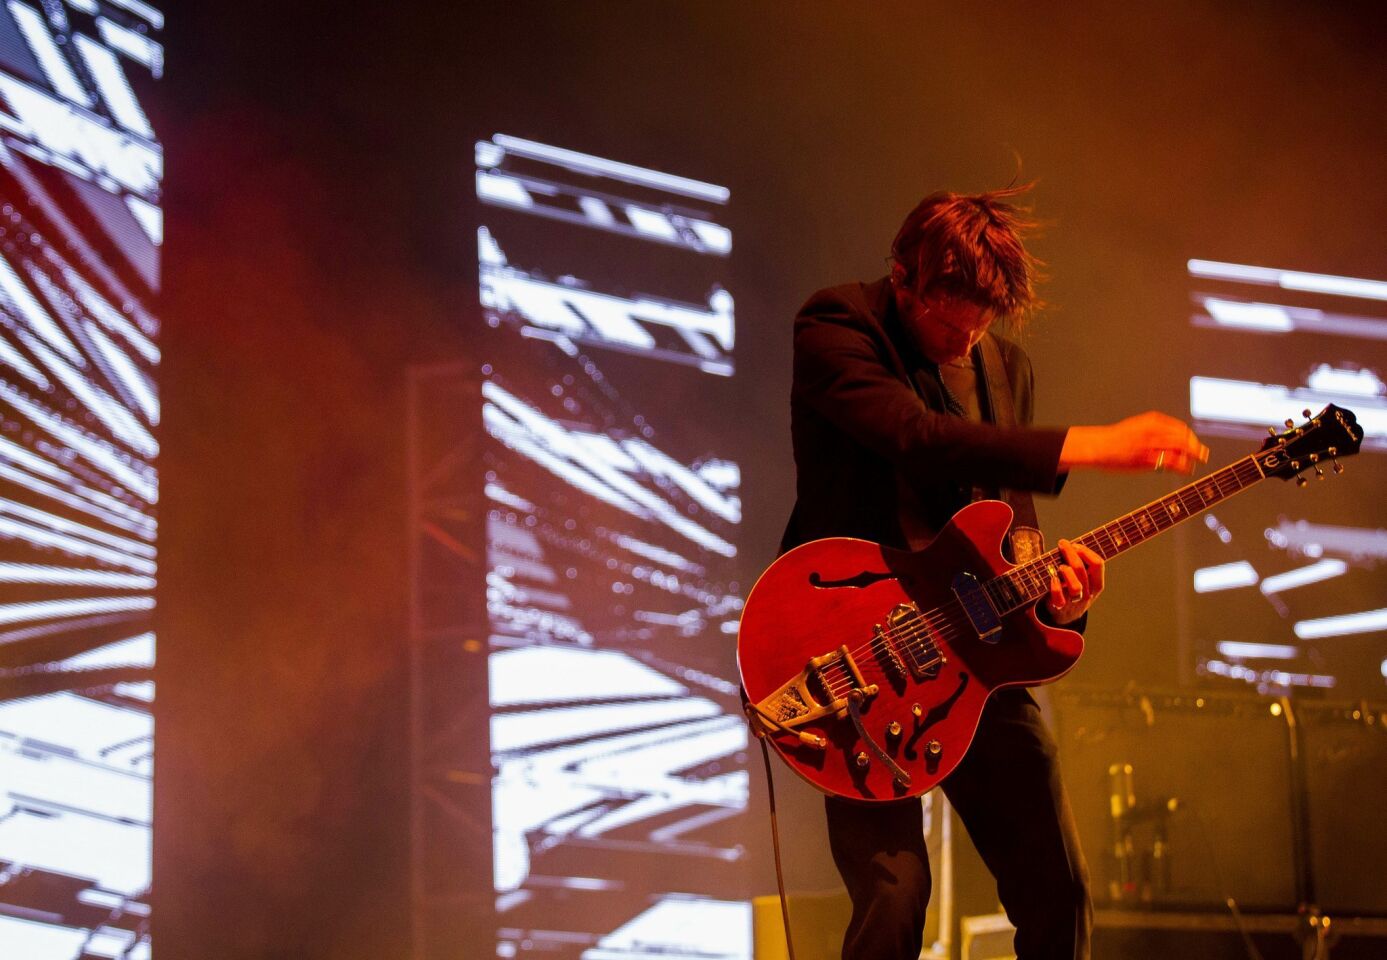 The 2015 Coachella Valley Music and Arts Festival gets underway. Interpol guitarist Daniel Kessler during the bands Friday night set.